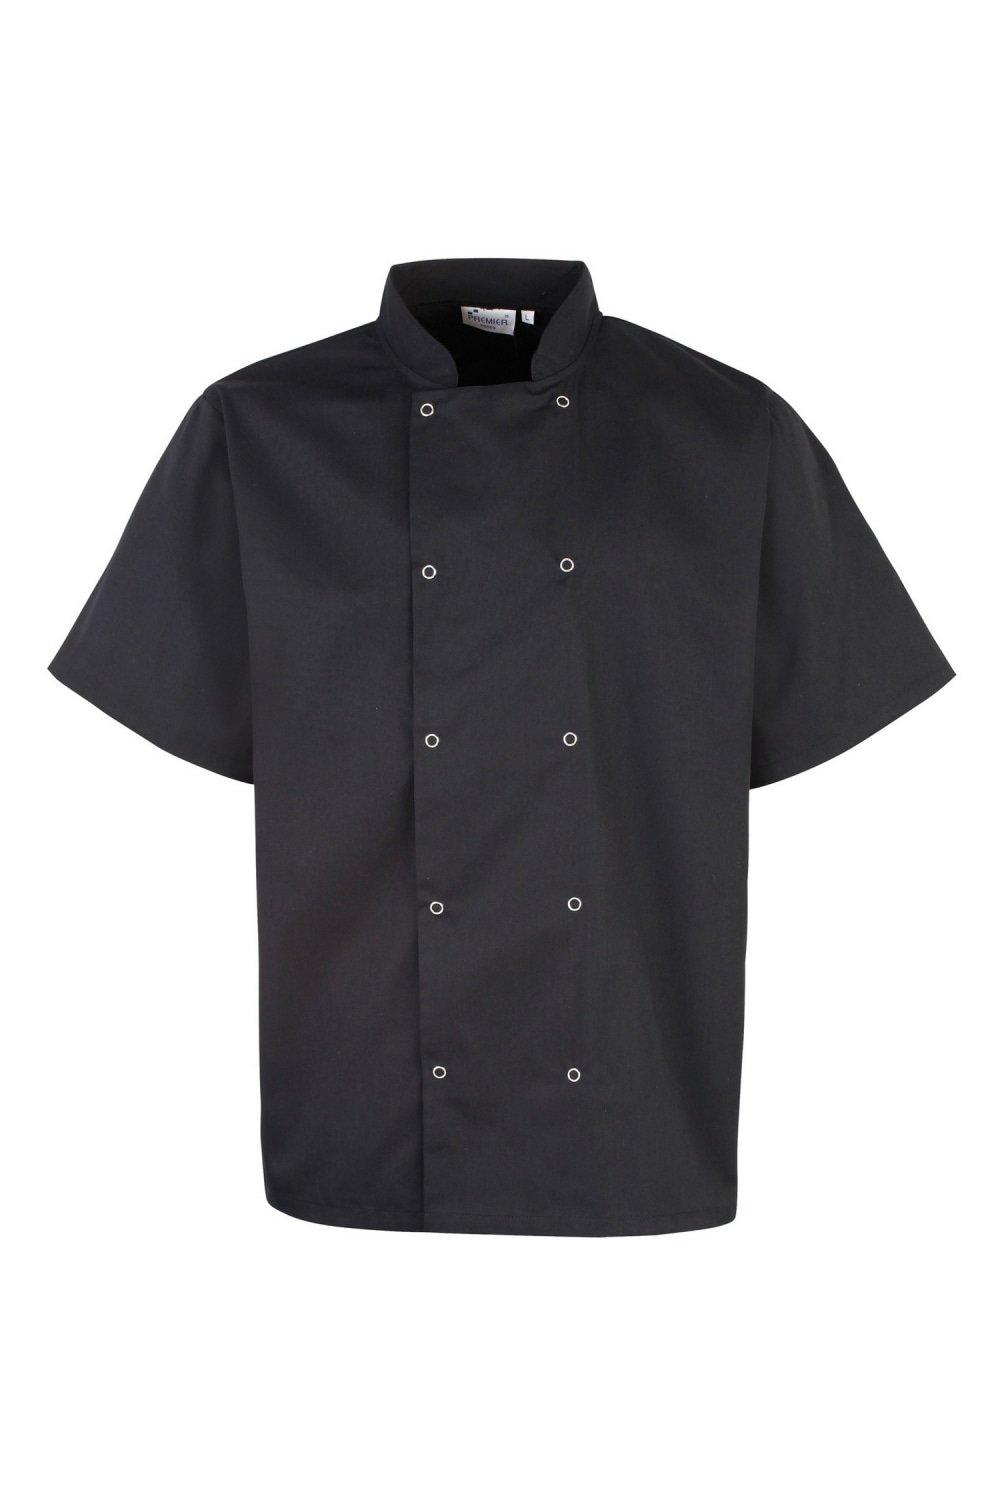 Studded Front Short Sleeve Chefs Jacket Pack of 2